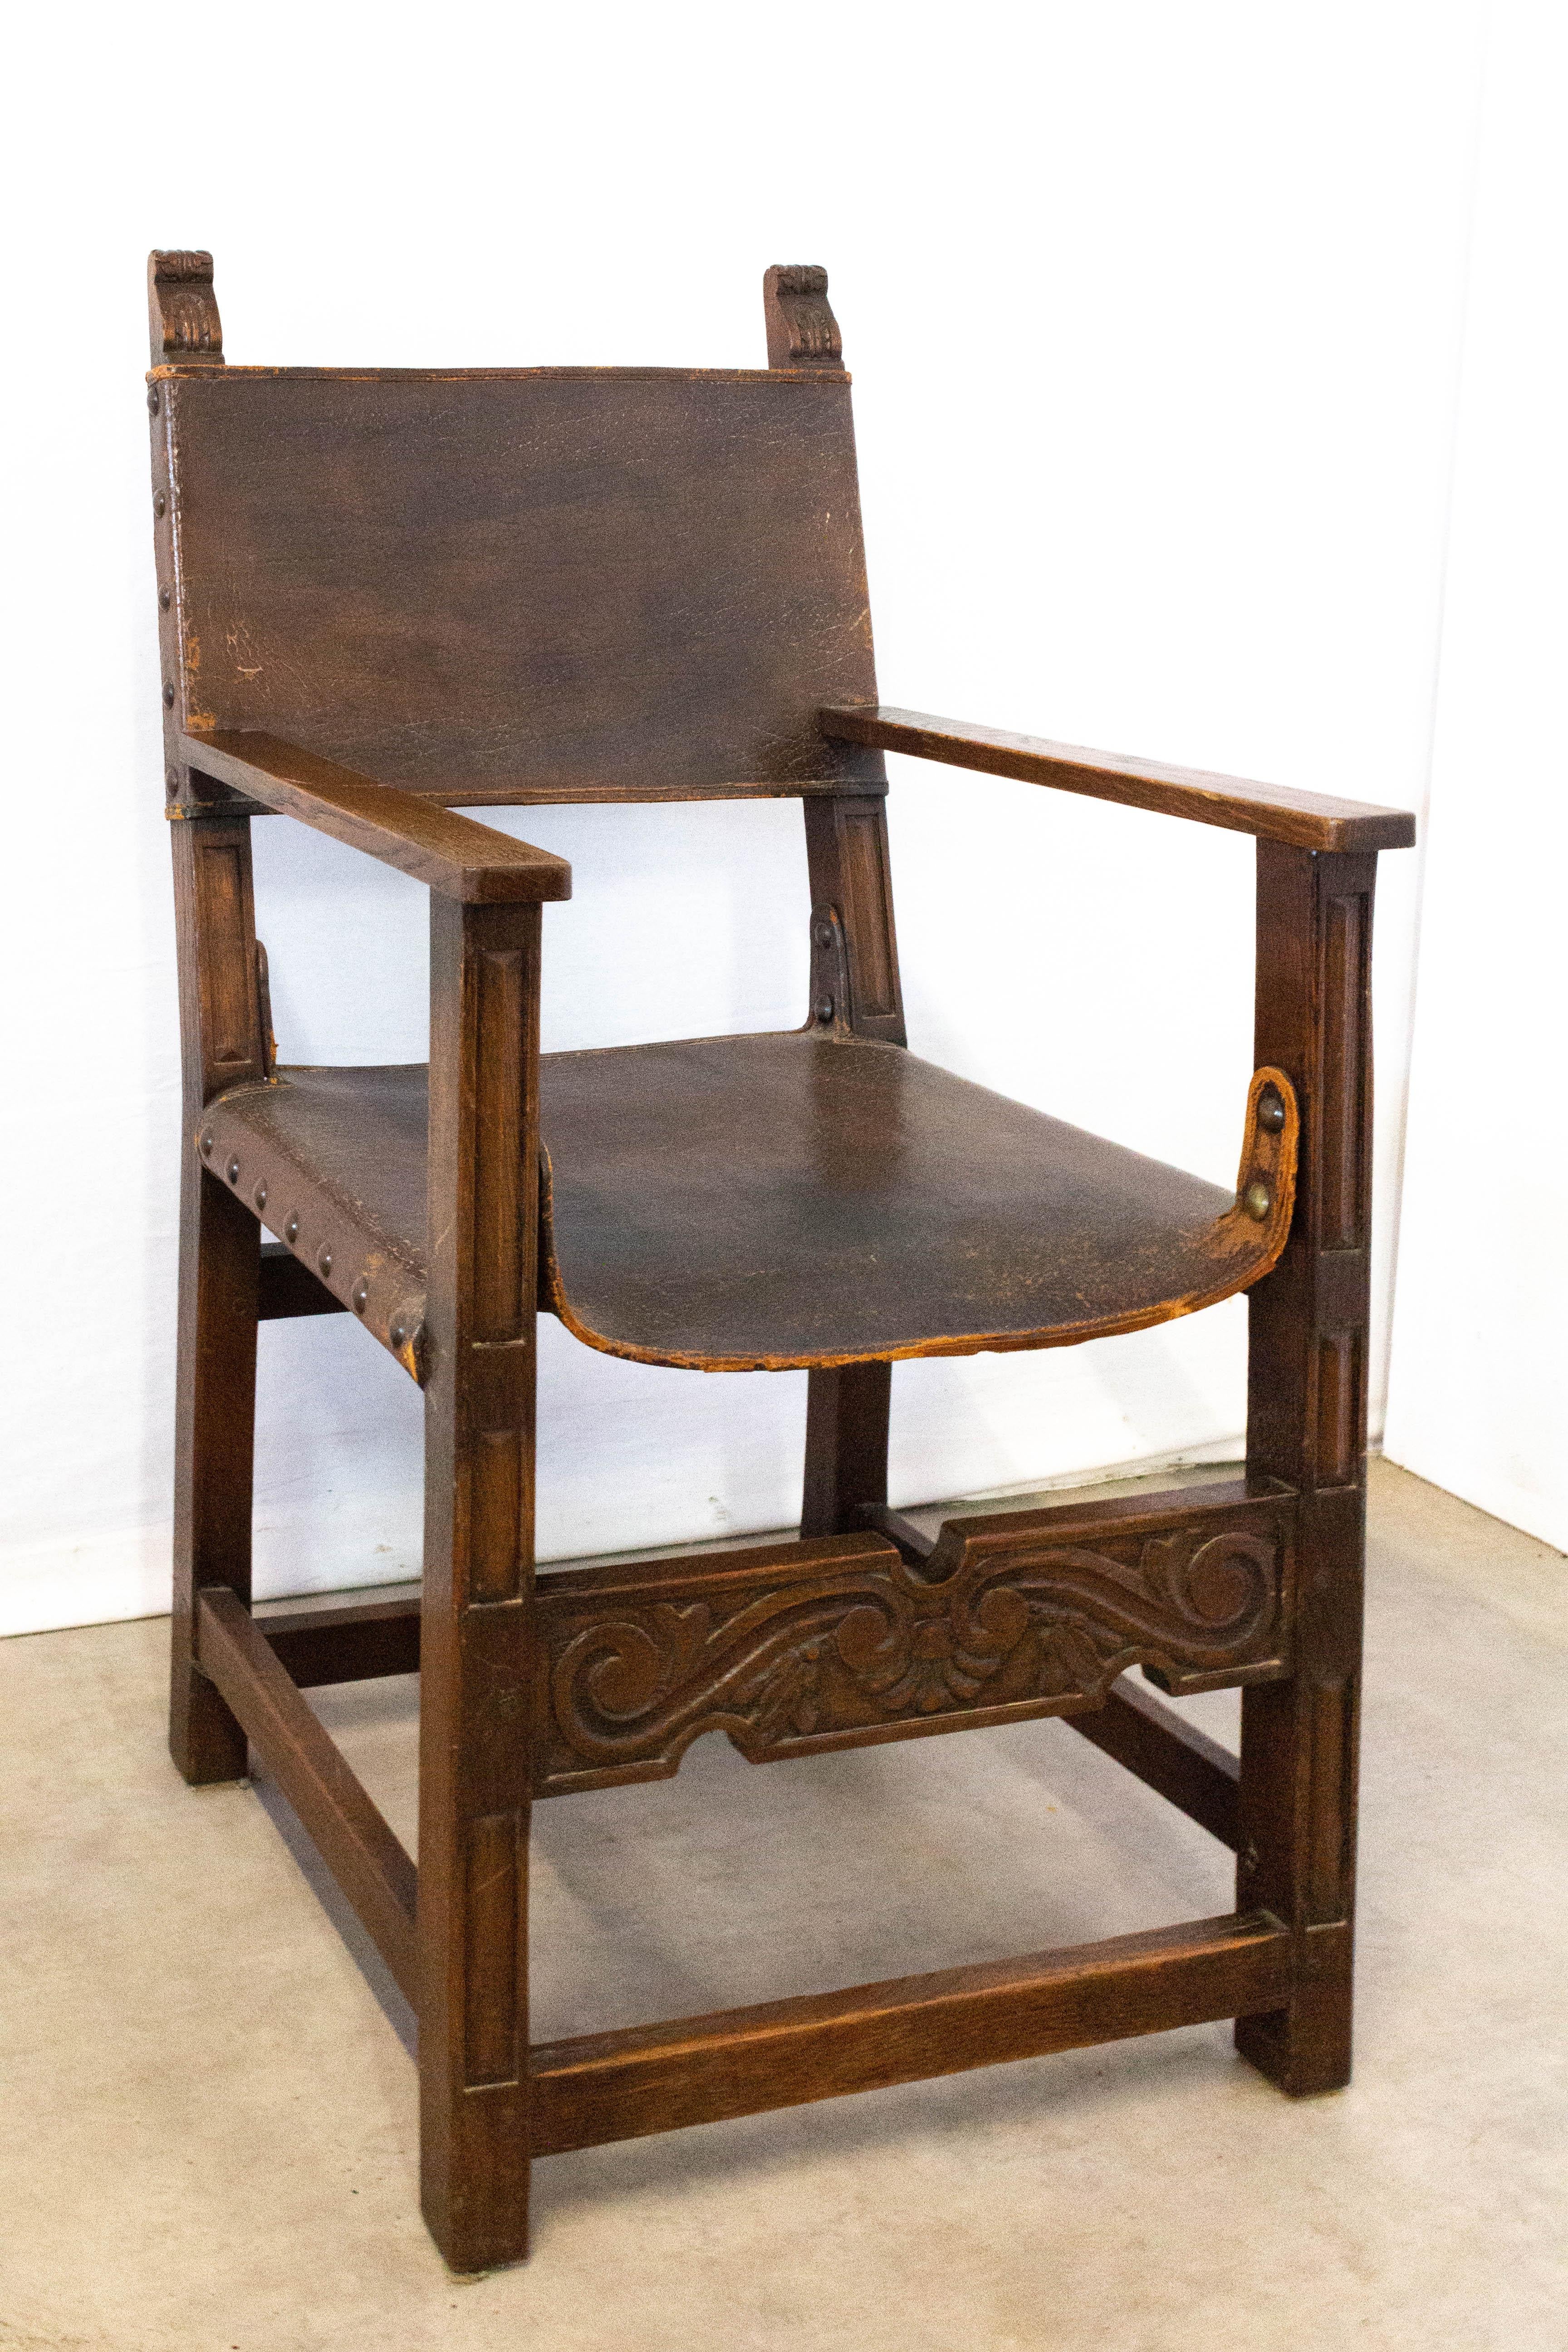 Early 20th century antique Spanish armchair hacienda style 
Leather and oak
Good condition for its age, solid and sound.